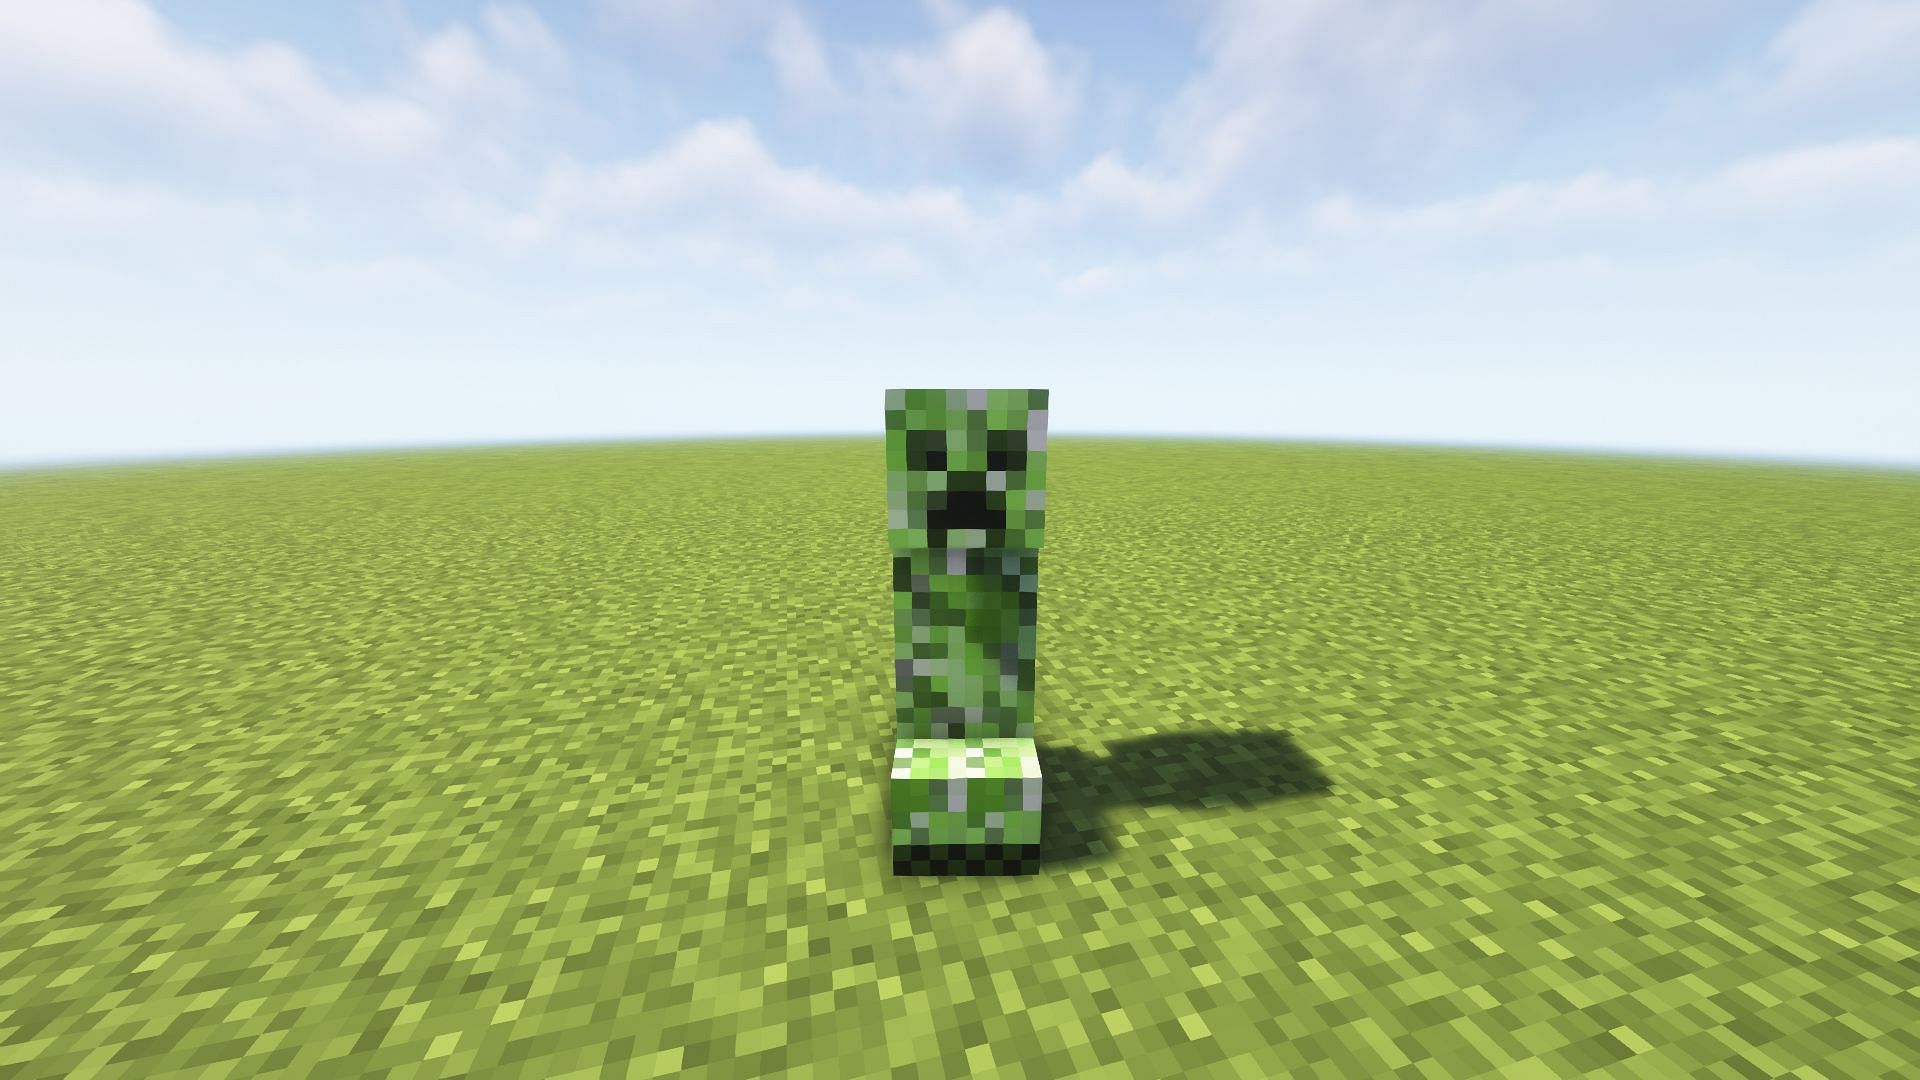 Creeper is the most iconic hostile mob in Minecraft that explodes itself (Image via Mojang)